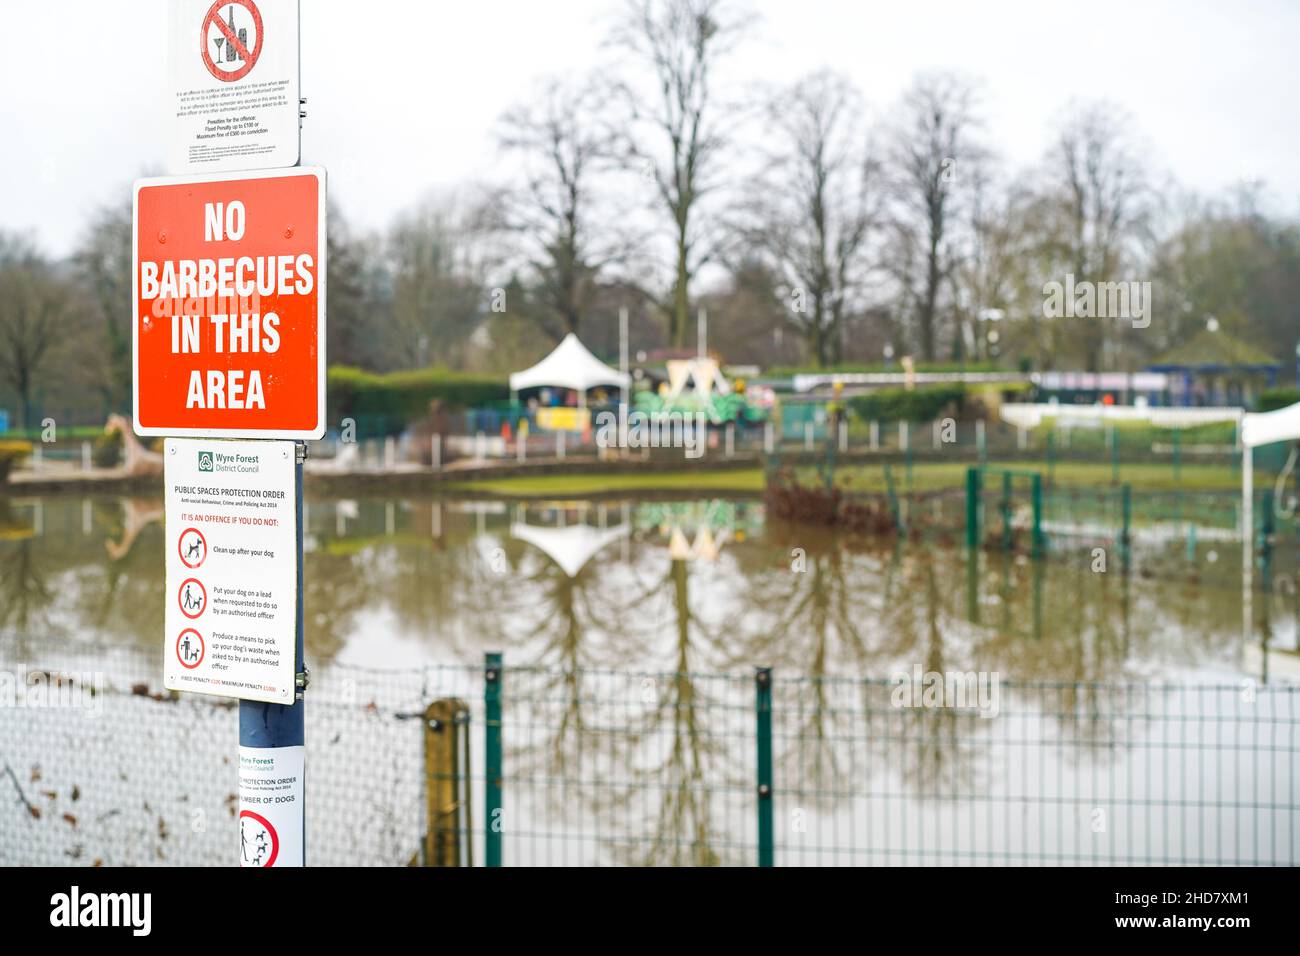 No barbecues in this area sign overlooking a flooded park area. Stock Photo